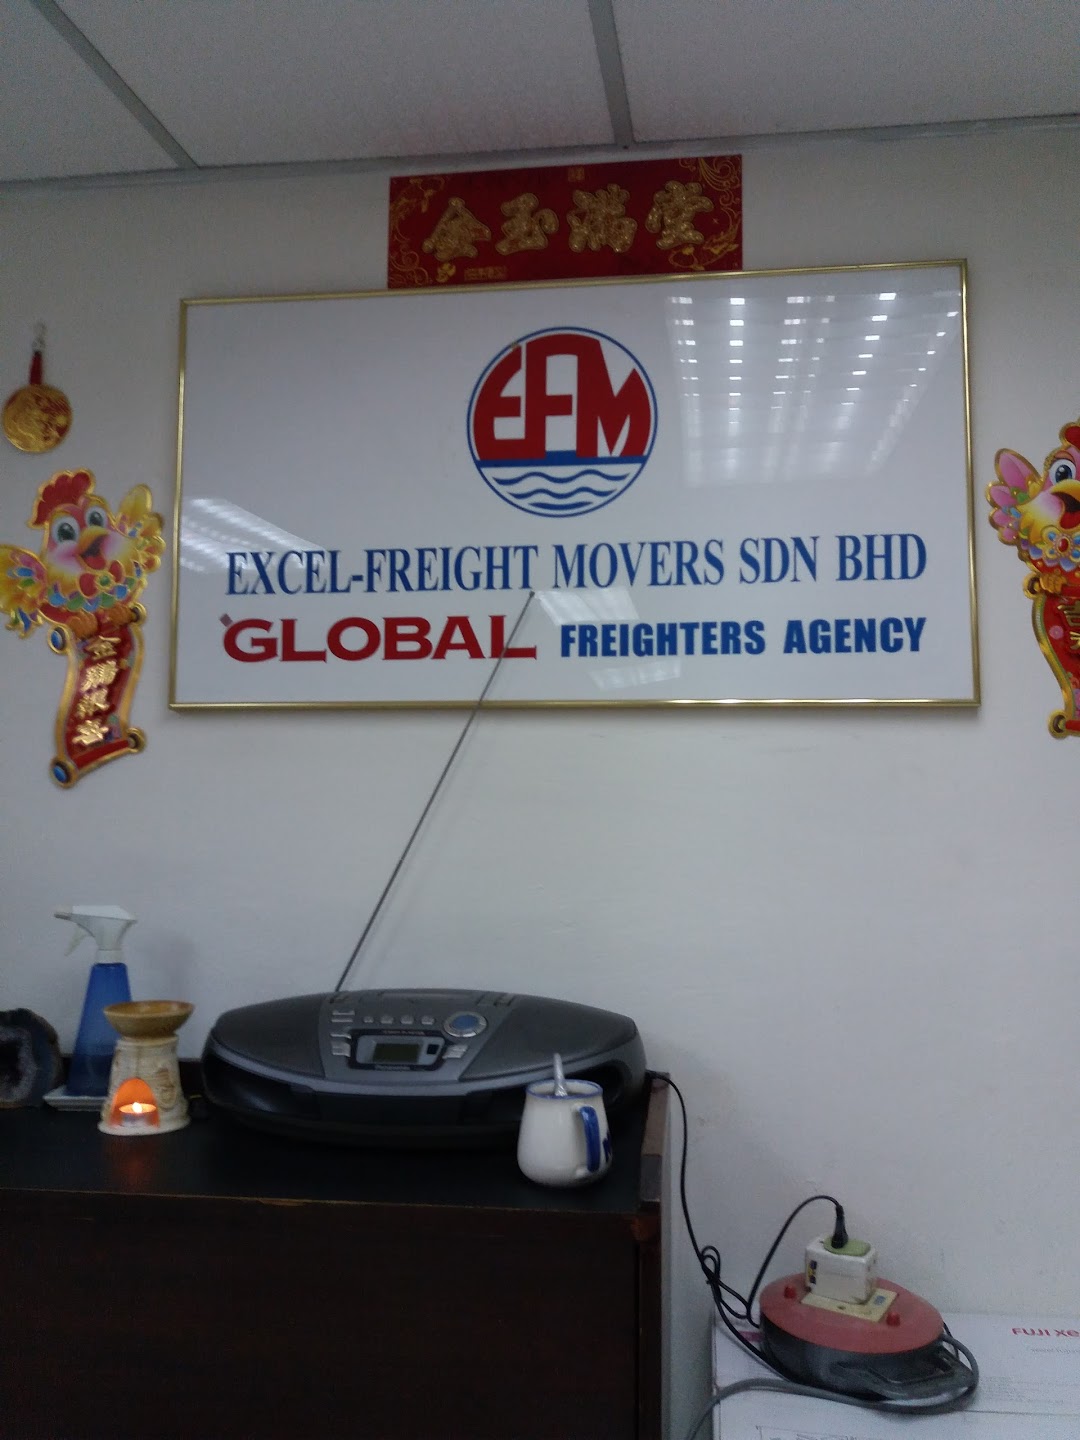 Excel-Freight Movers Sdn Bhd